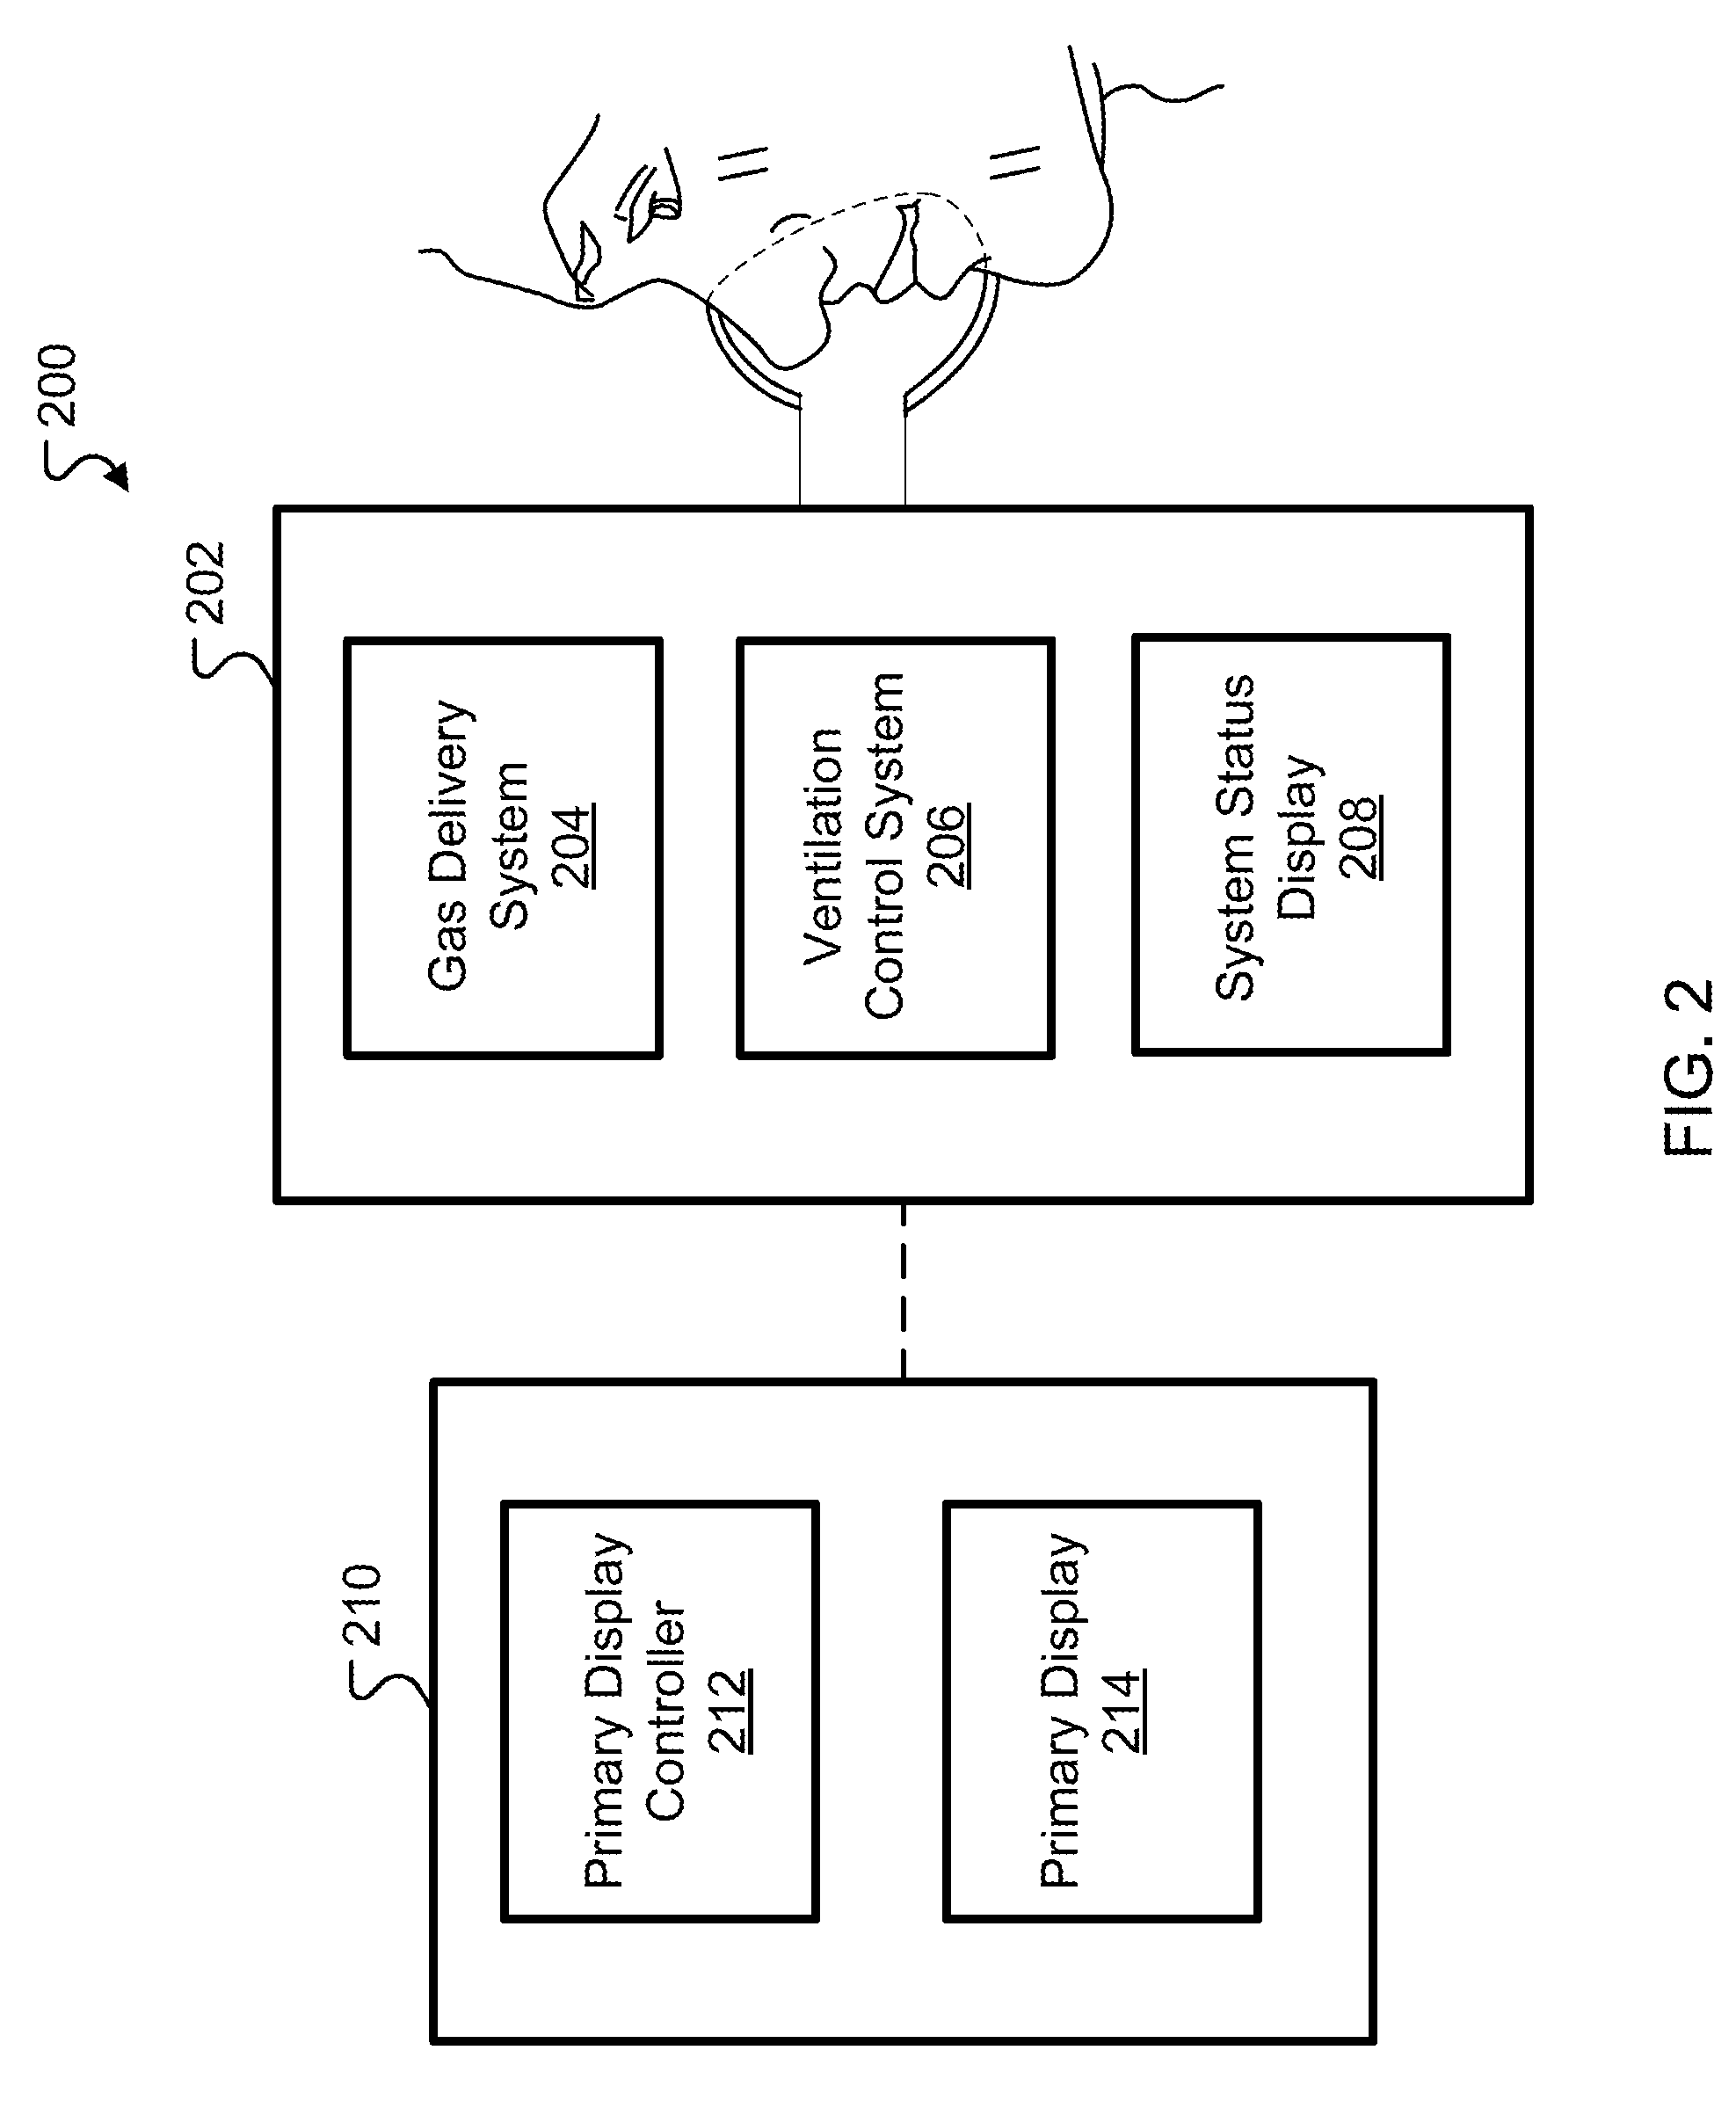 Ventilation System With System Status Display For Configuration And Program Information